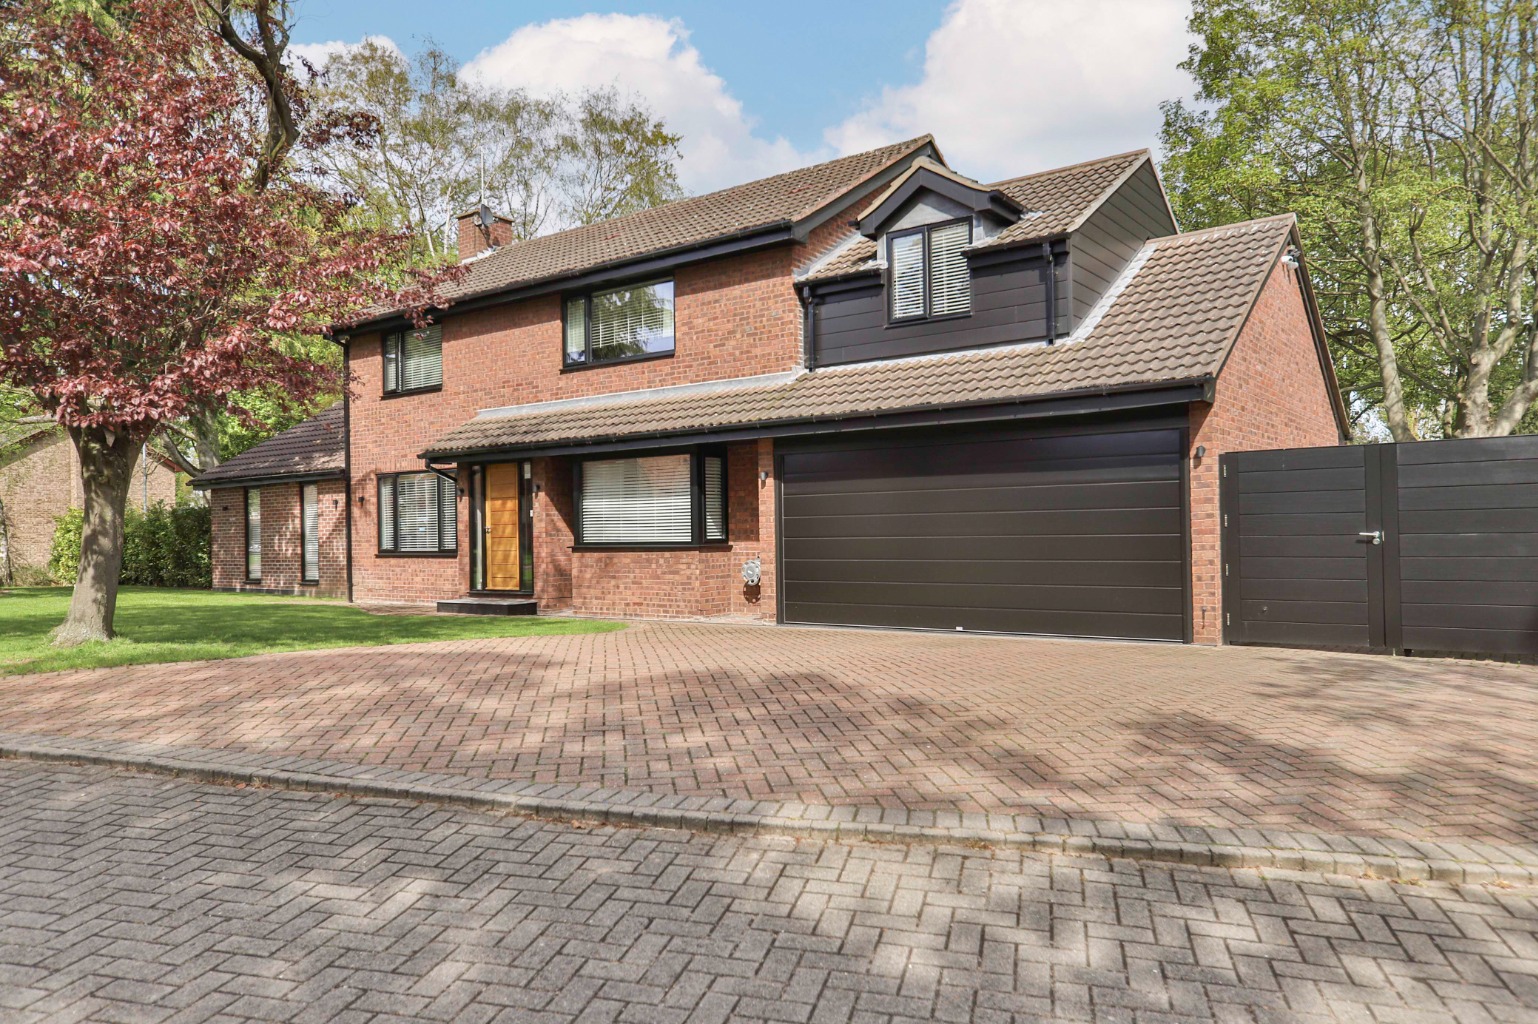 4 bed detached house for sale in Fountain Close, Hessle - Property Image 1